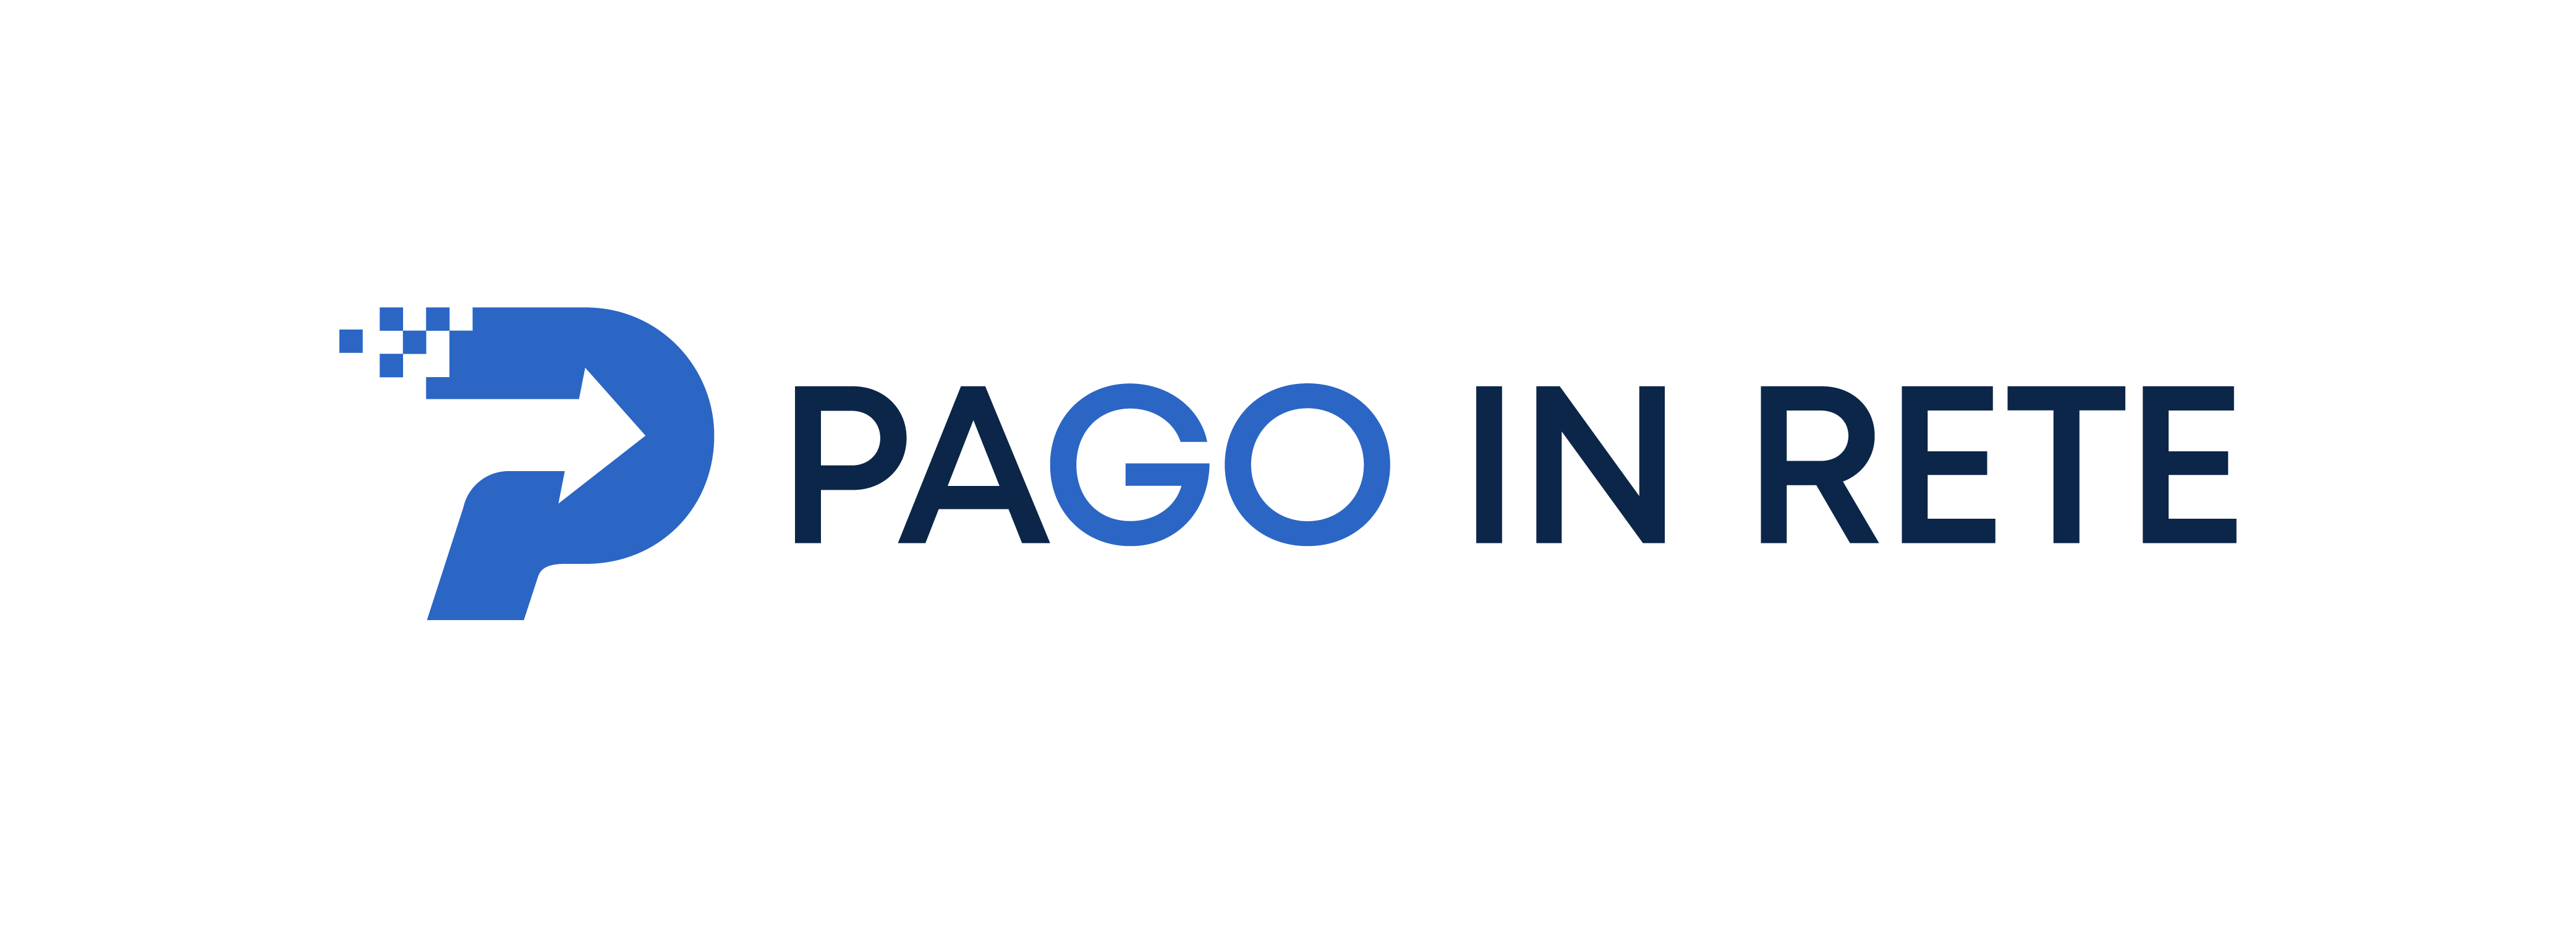 PAGO IN RETE_RGB_positivo-01.png